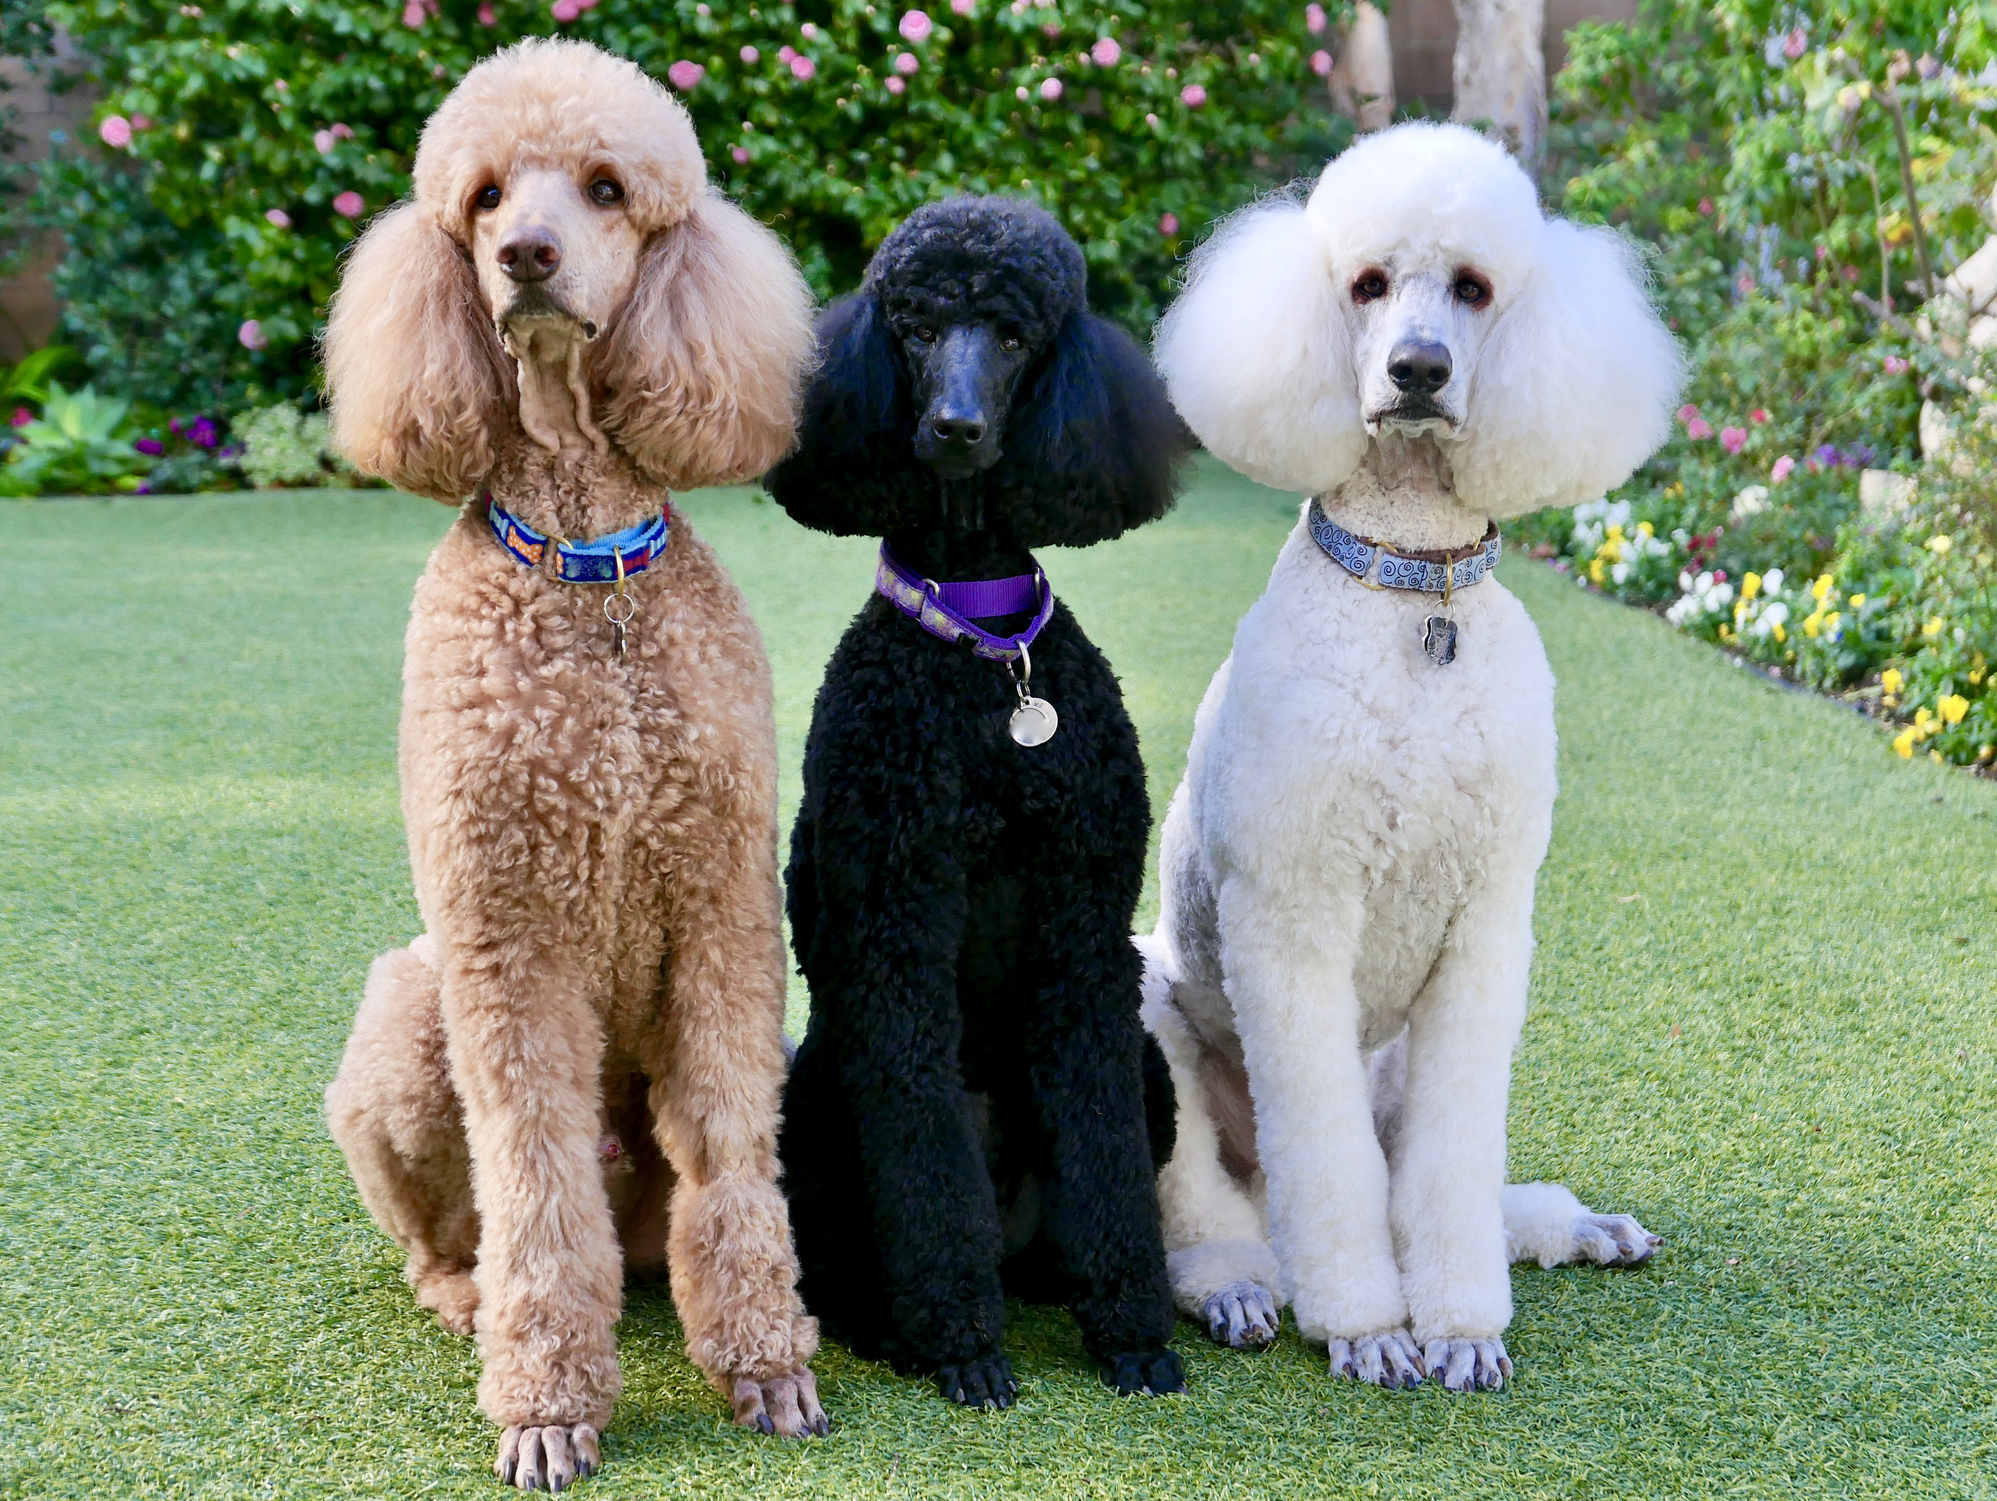 Apricot, black, and white standard poodles sitting outdoors